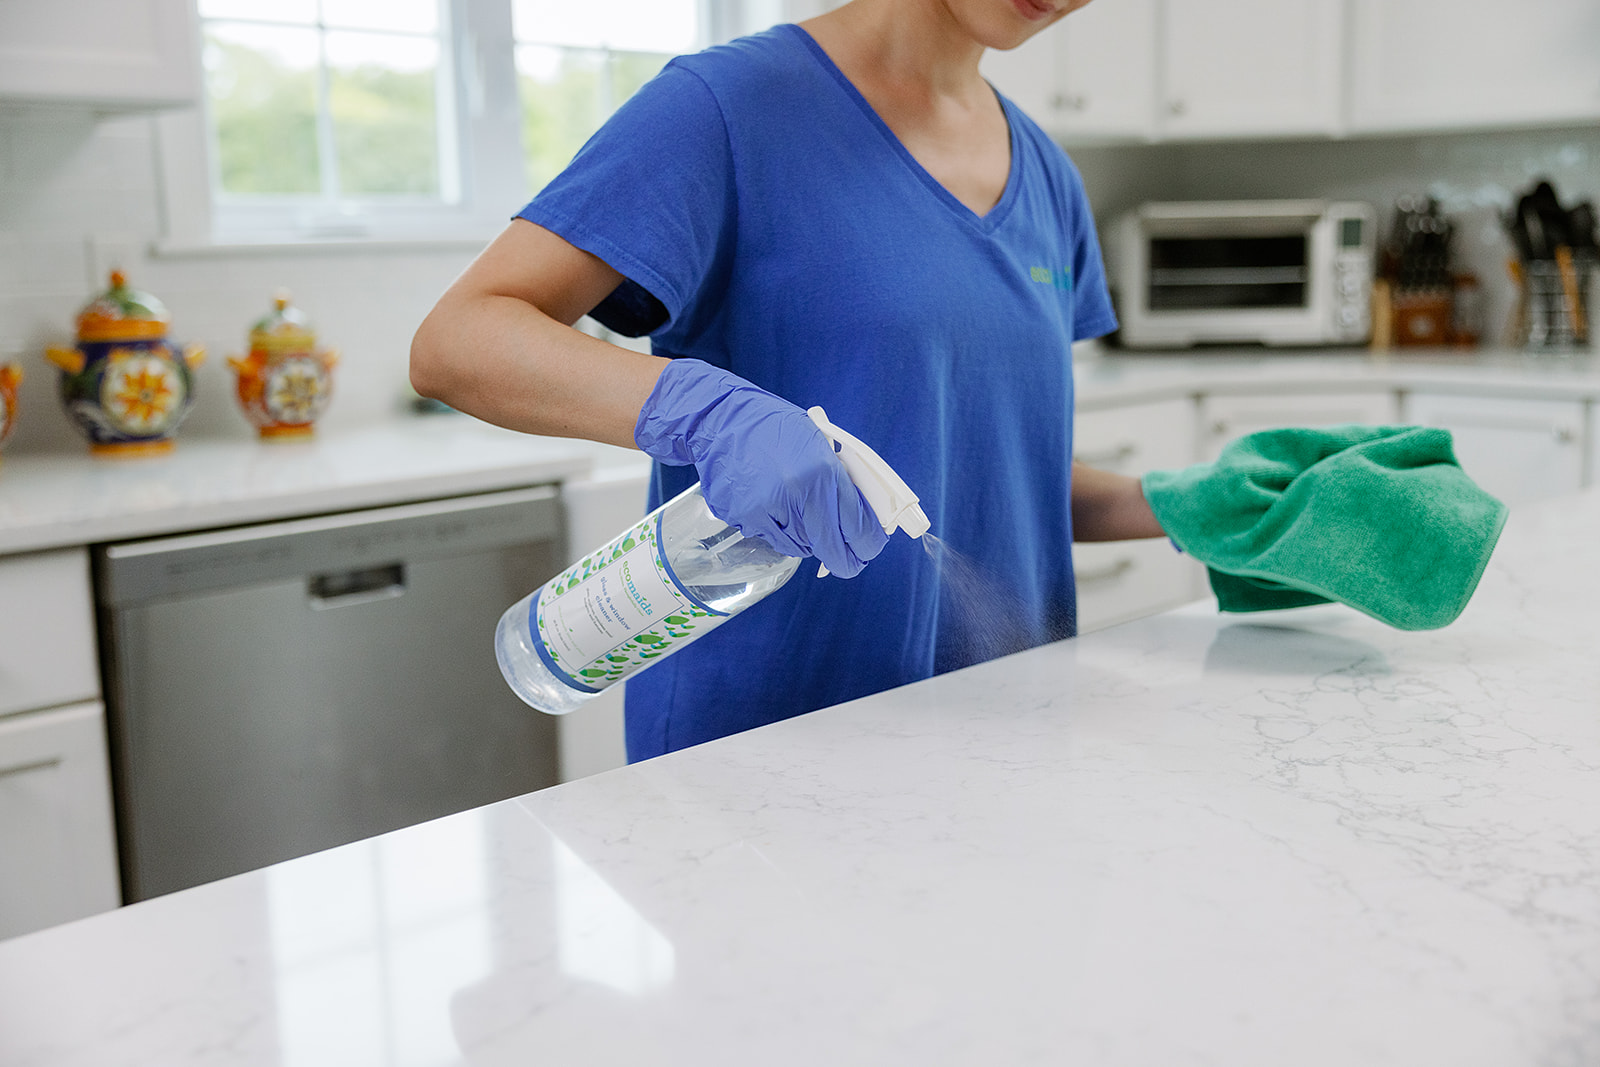 Maid Services in Kingwood